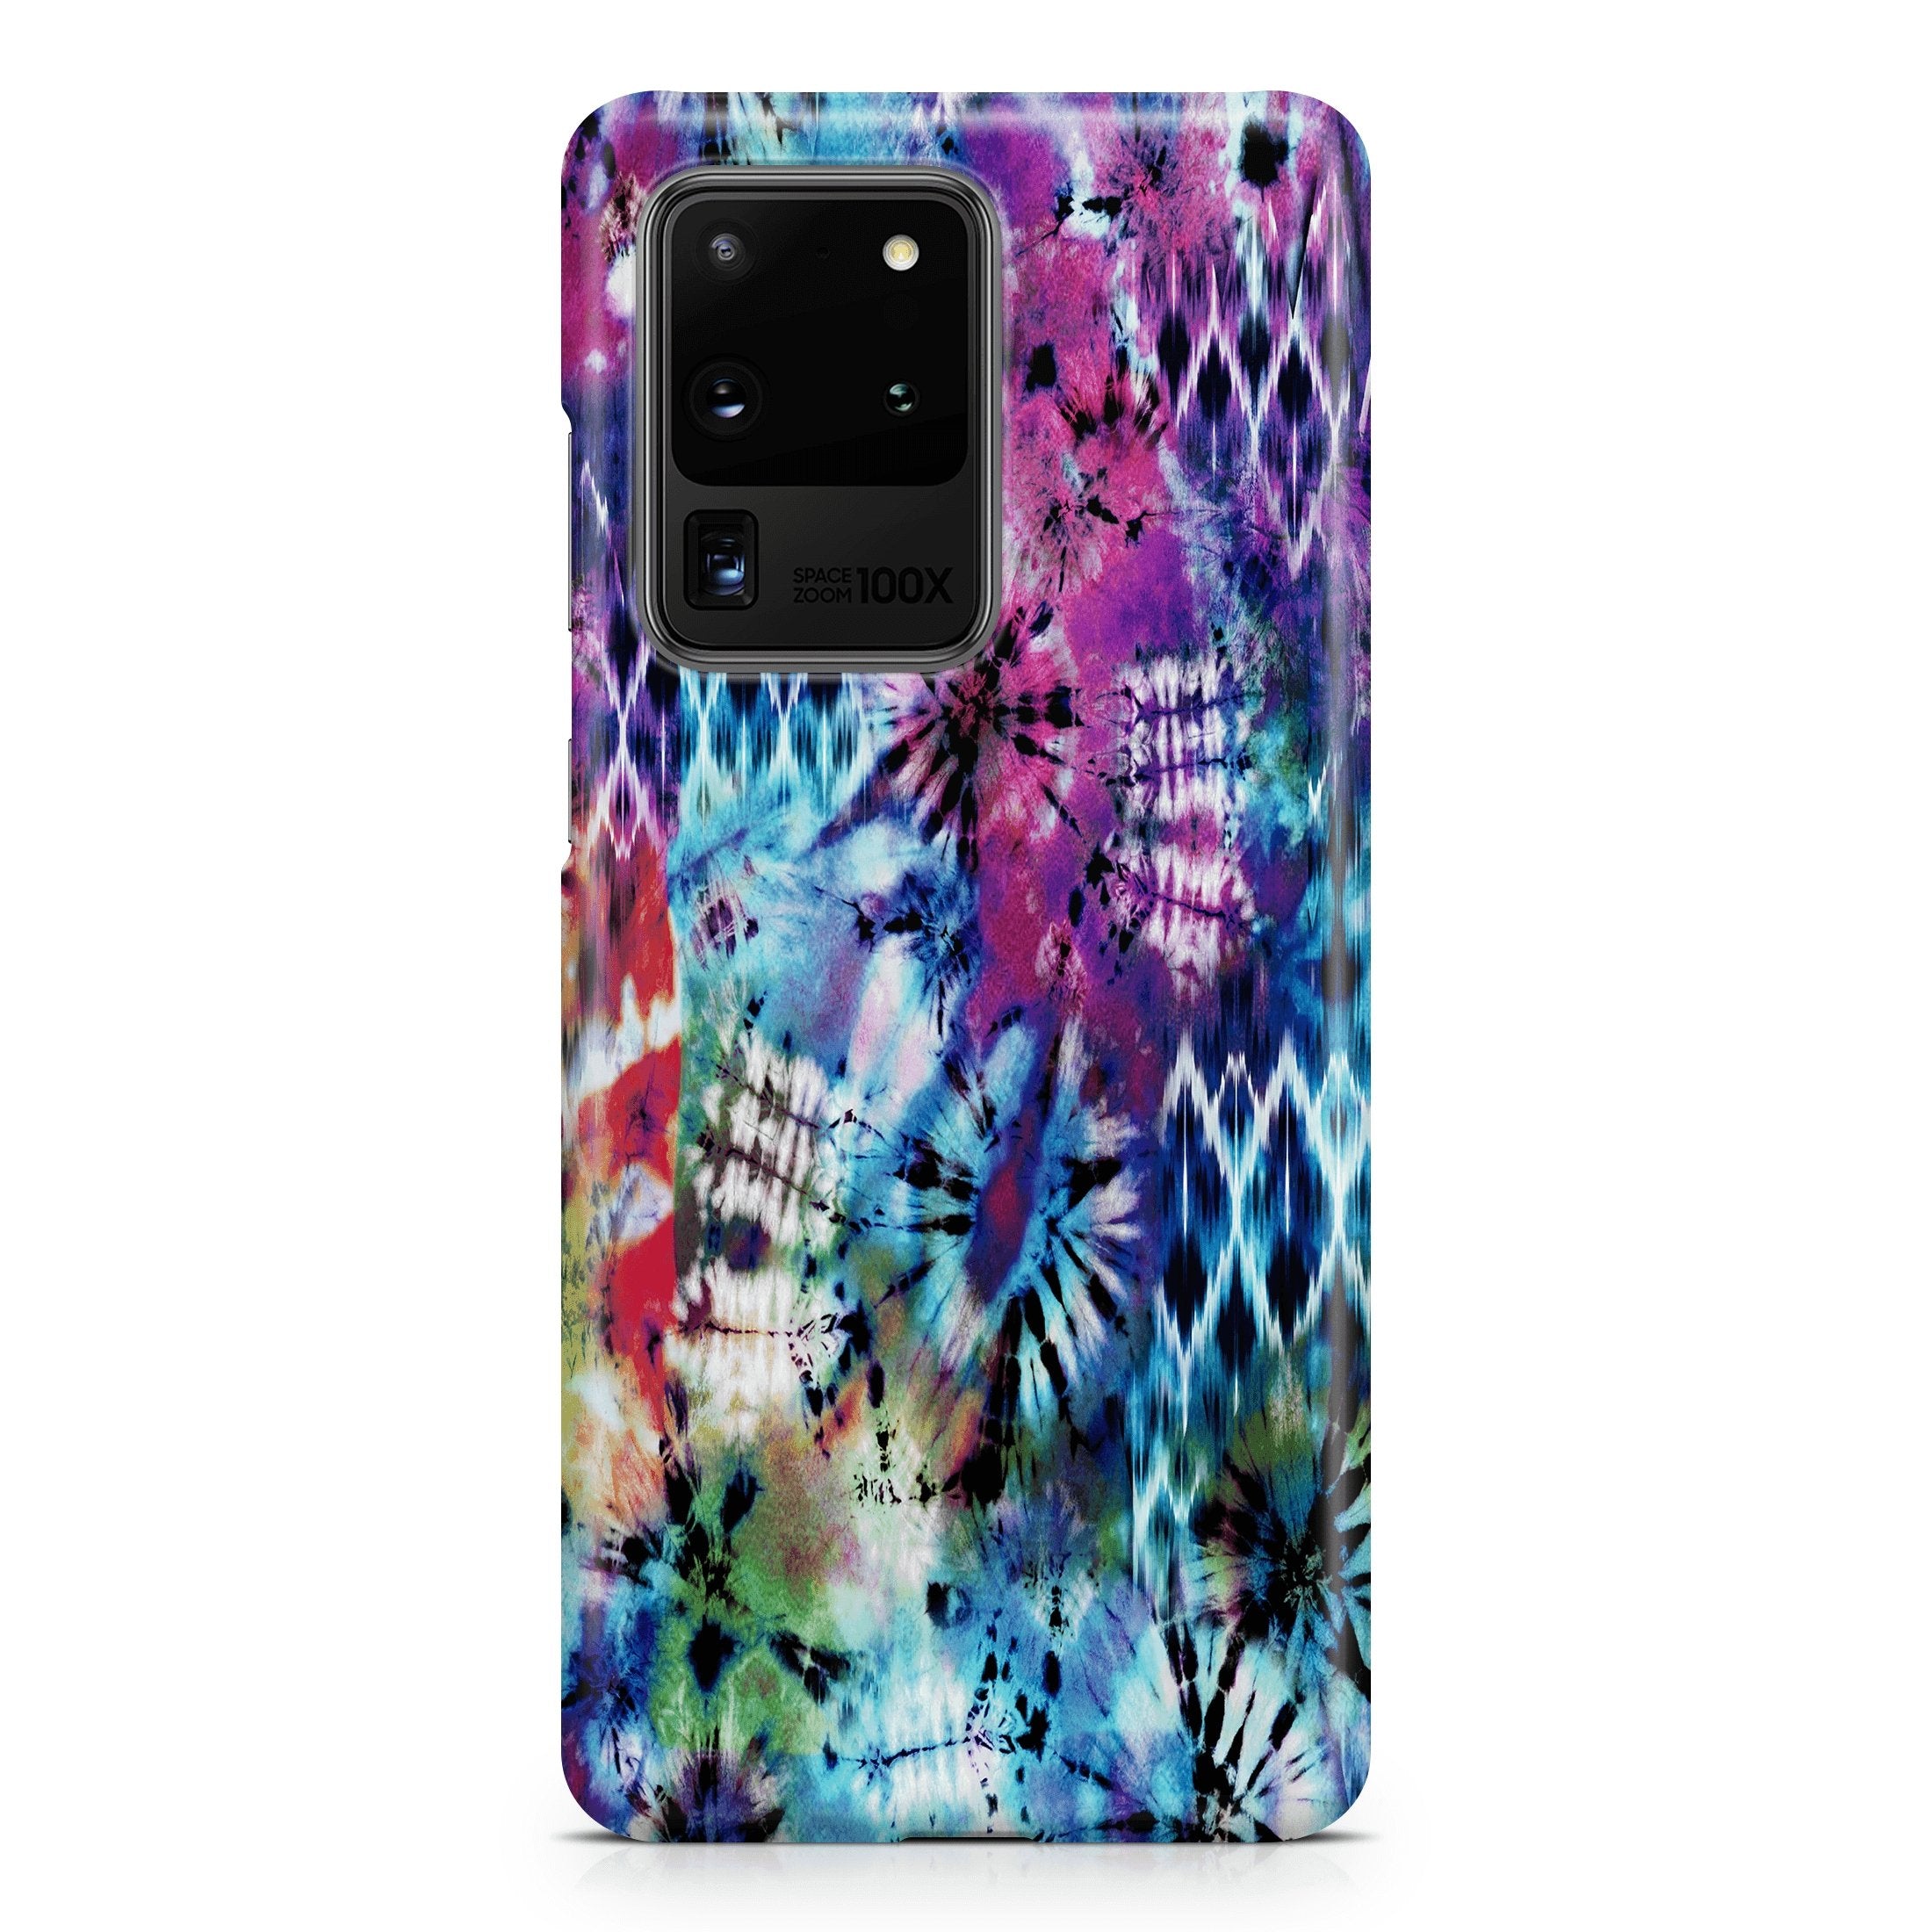 Chaos Tie Dye - Samsung phone case designs by CaseSwagger